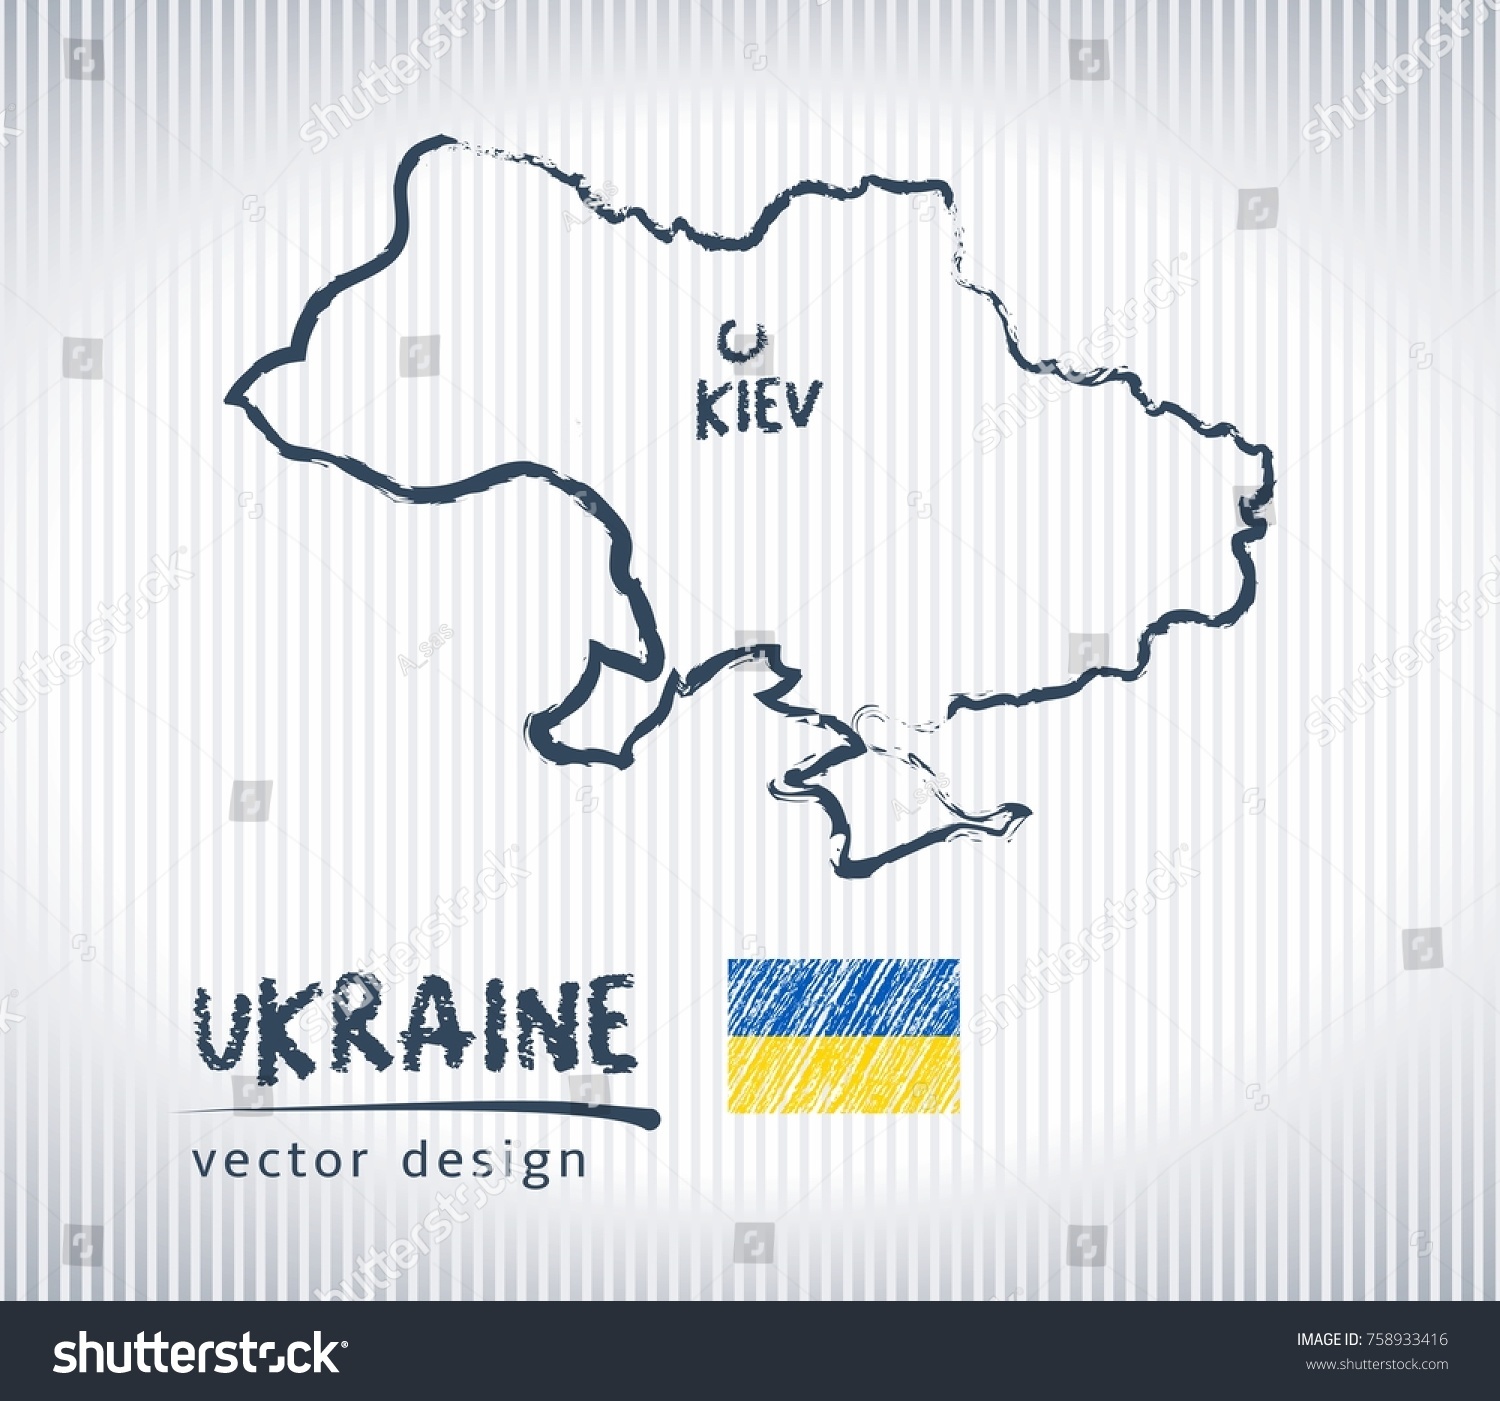 Ukraine vector sketch chalk drawing map isolated Royalty Free Stock